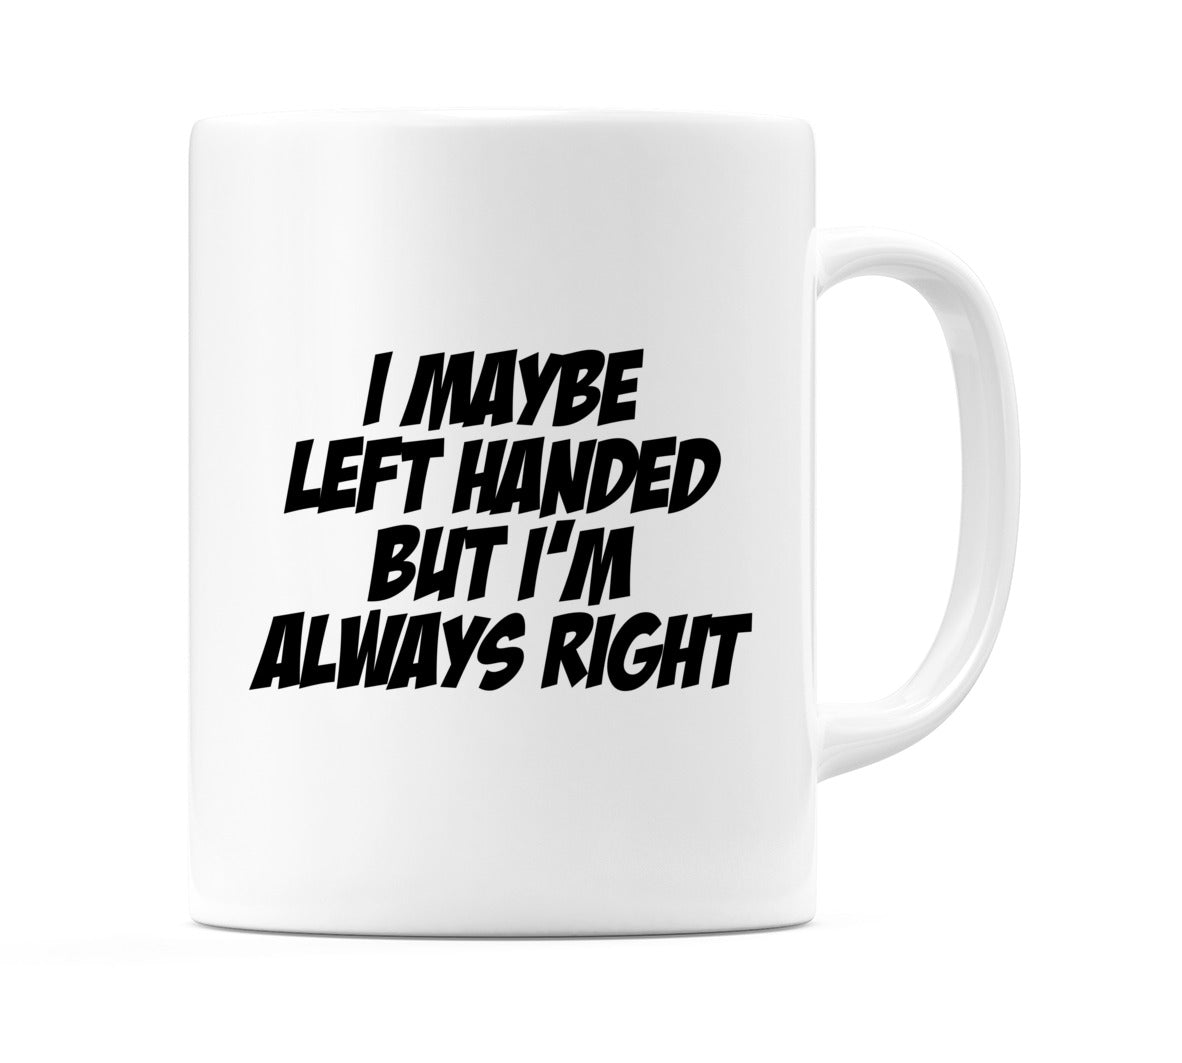 I May Be Left Handed But I'm Always Right Mug